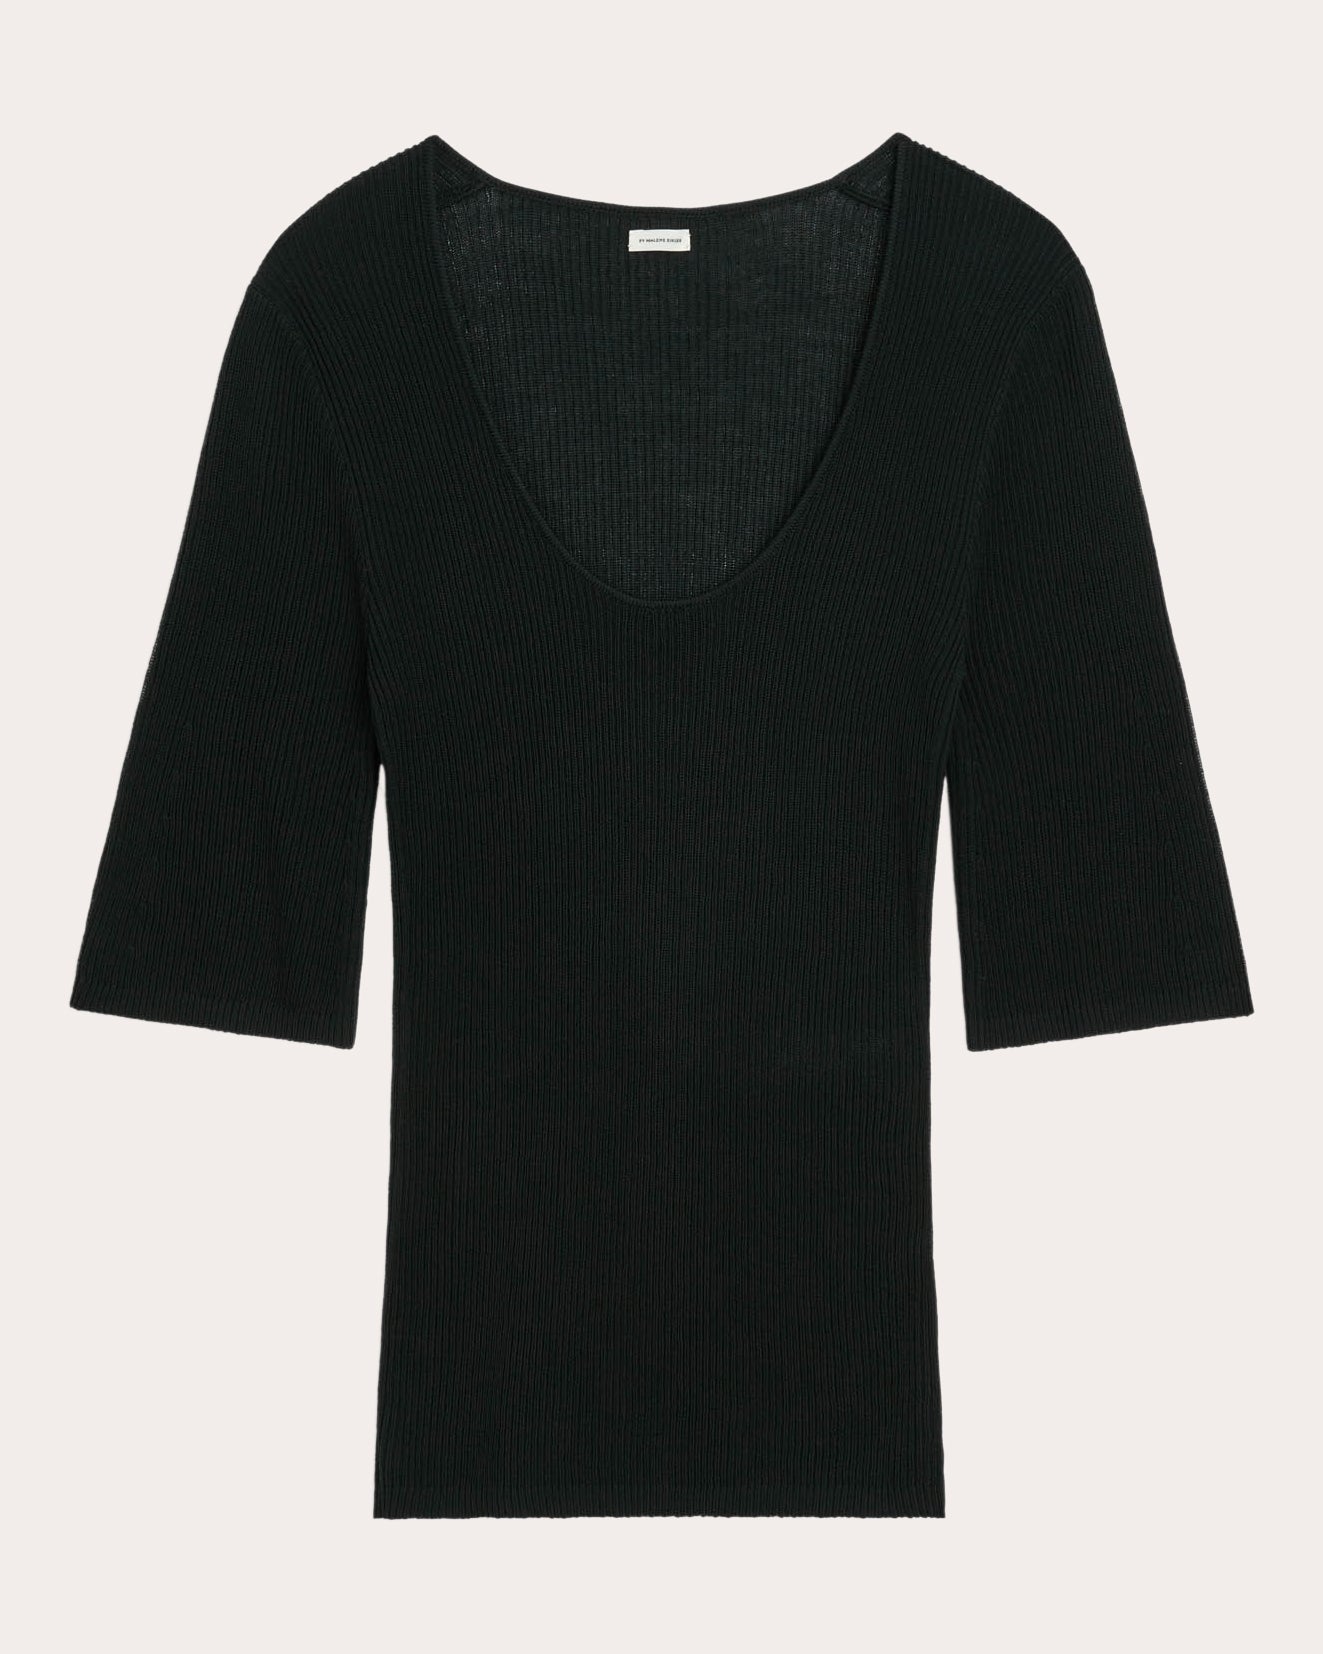 BY MALENE BIRGER WOMEN'S REMONA RIBBED TOP